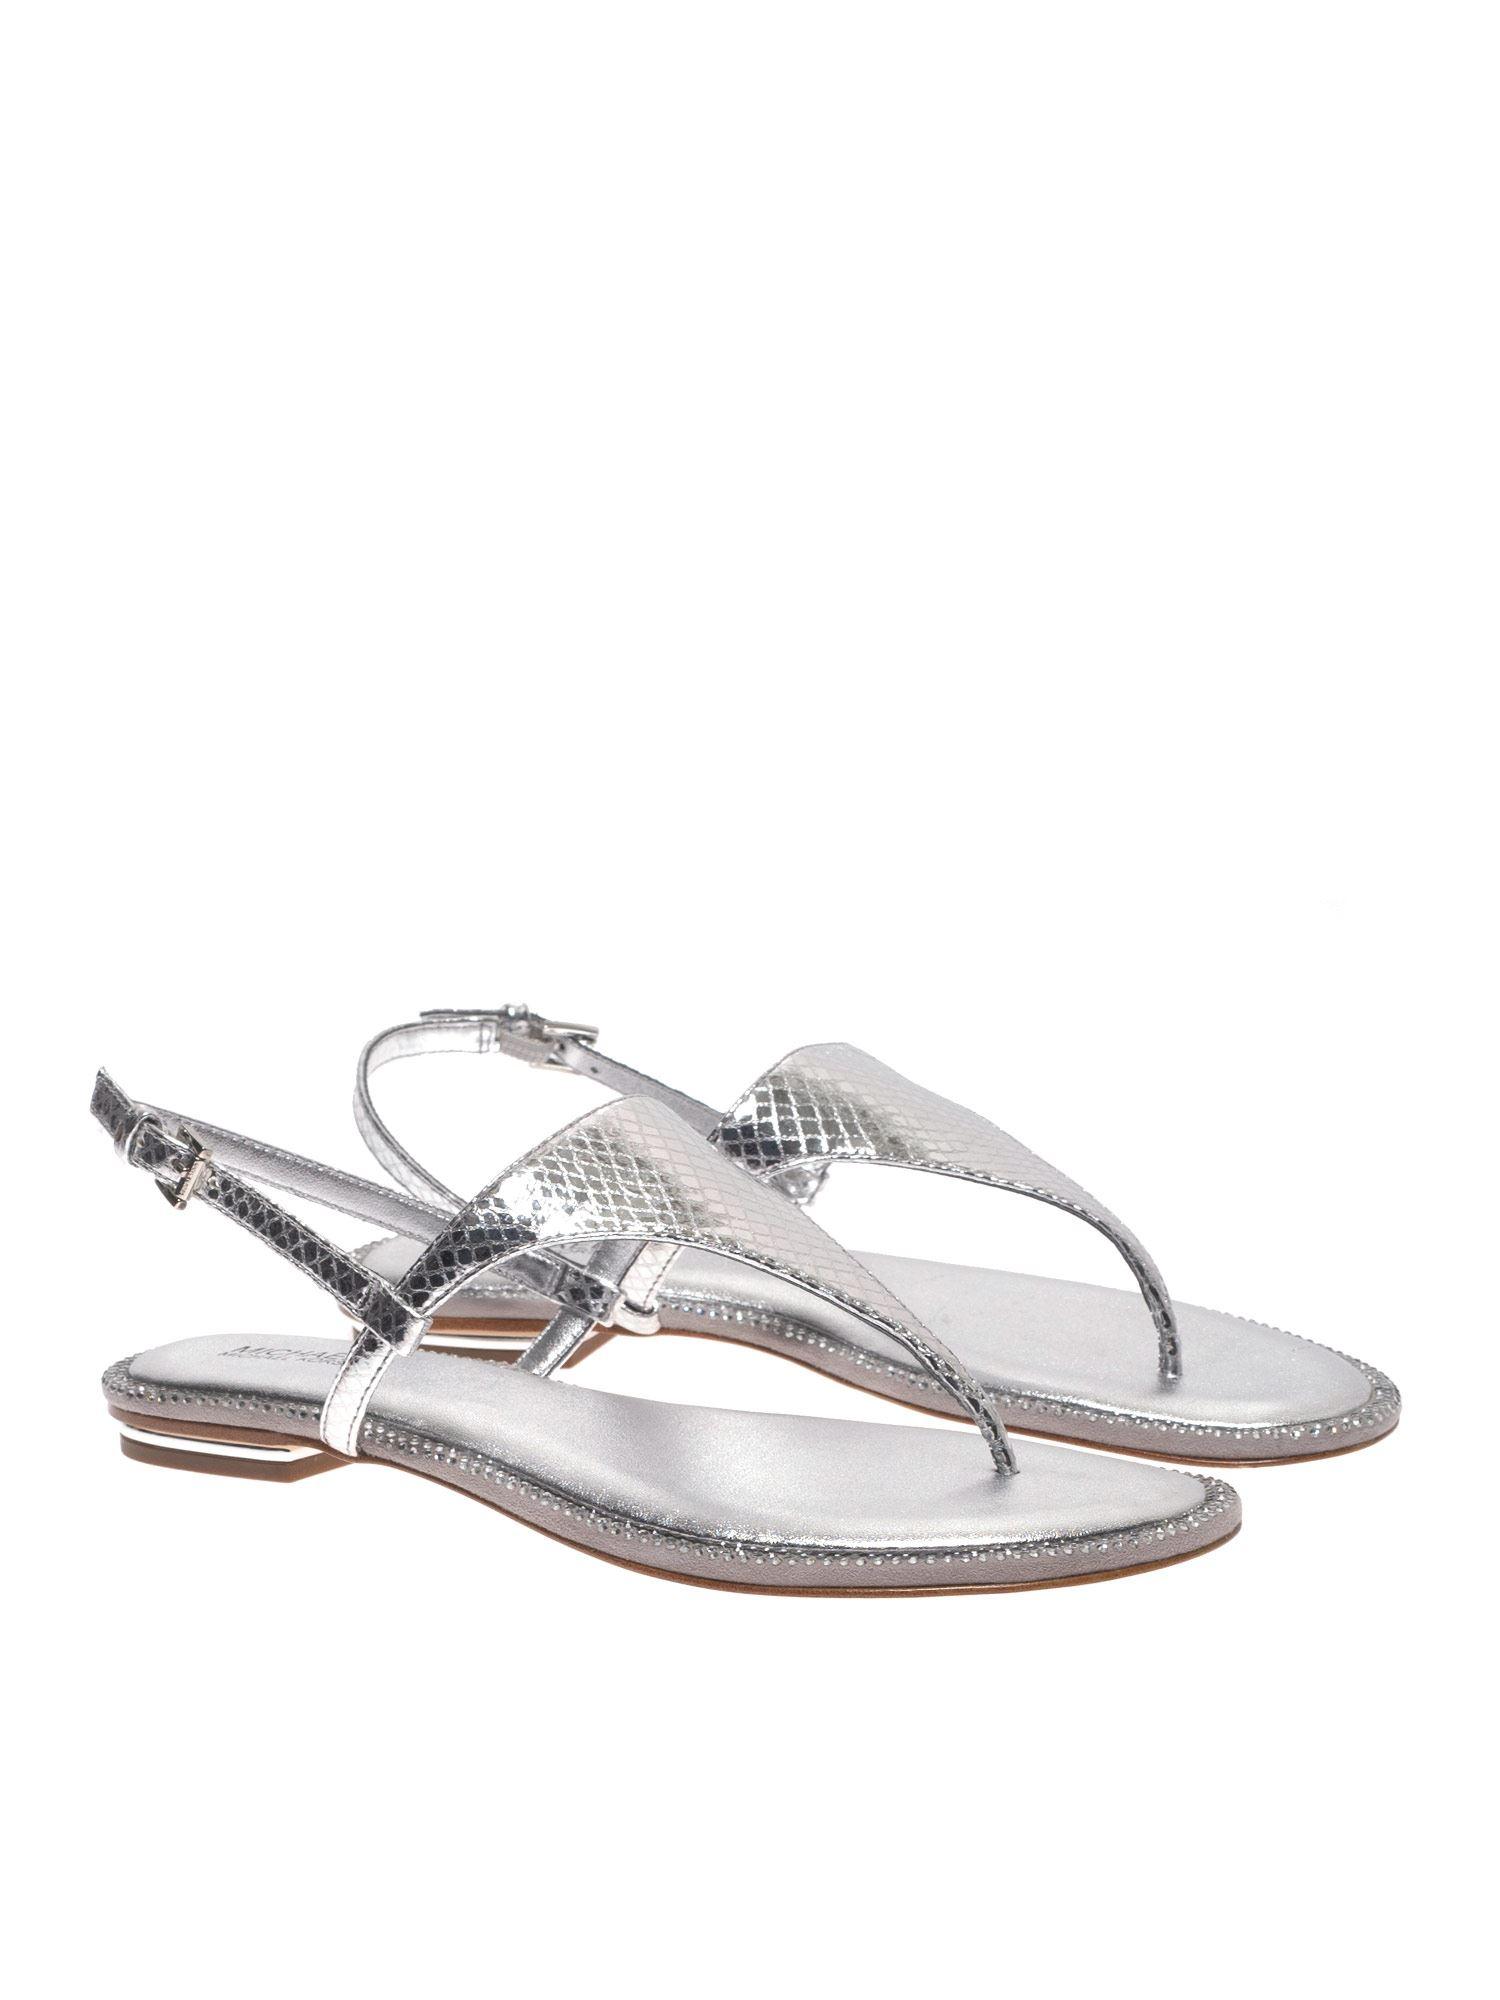 Michael Kors Leather Enid Thong Sandals In Silver in Metallic - Lyst